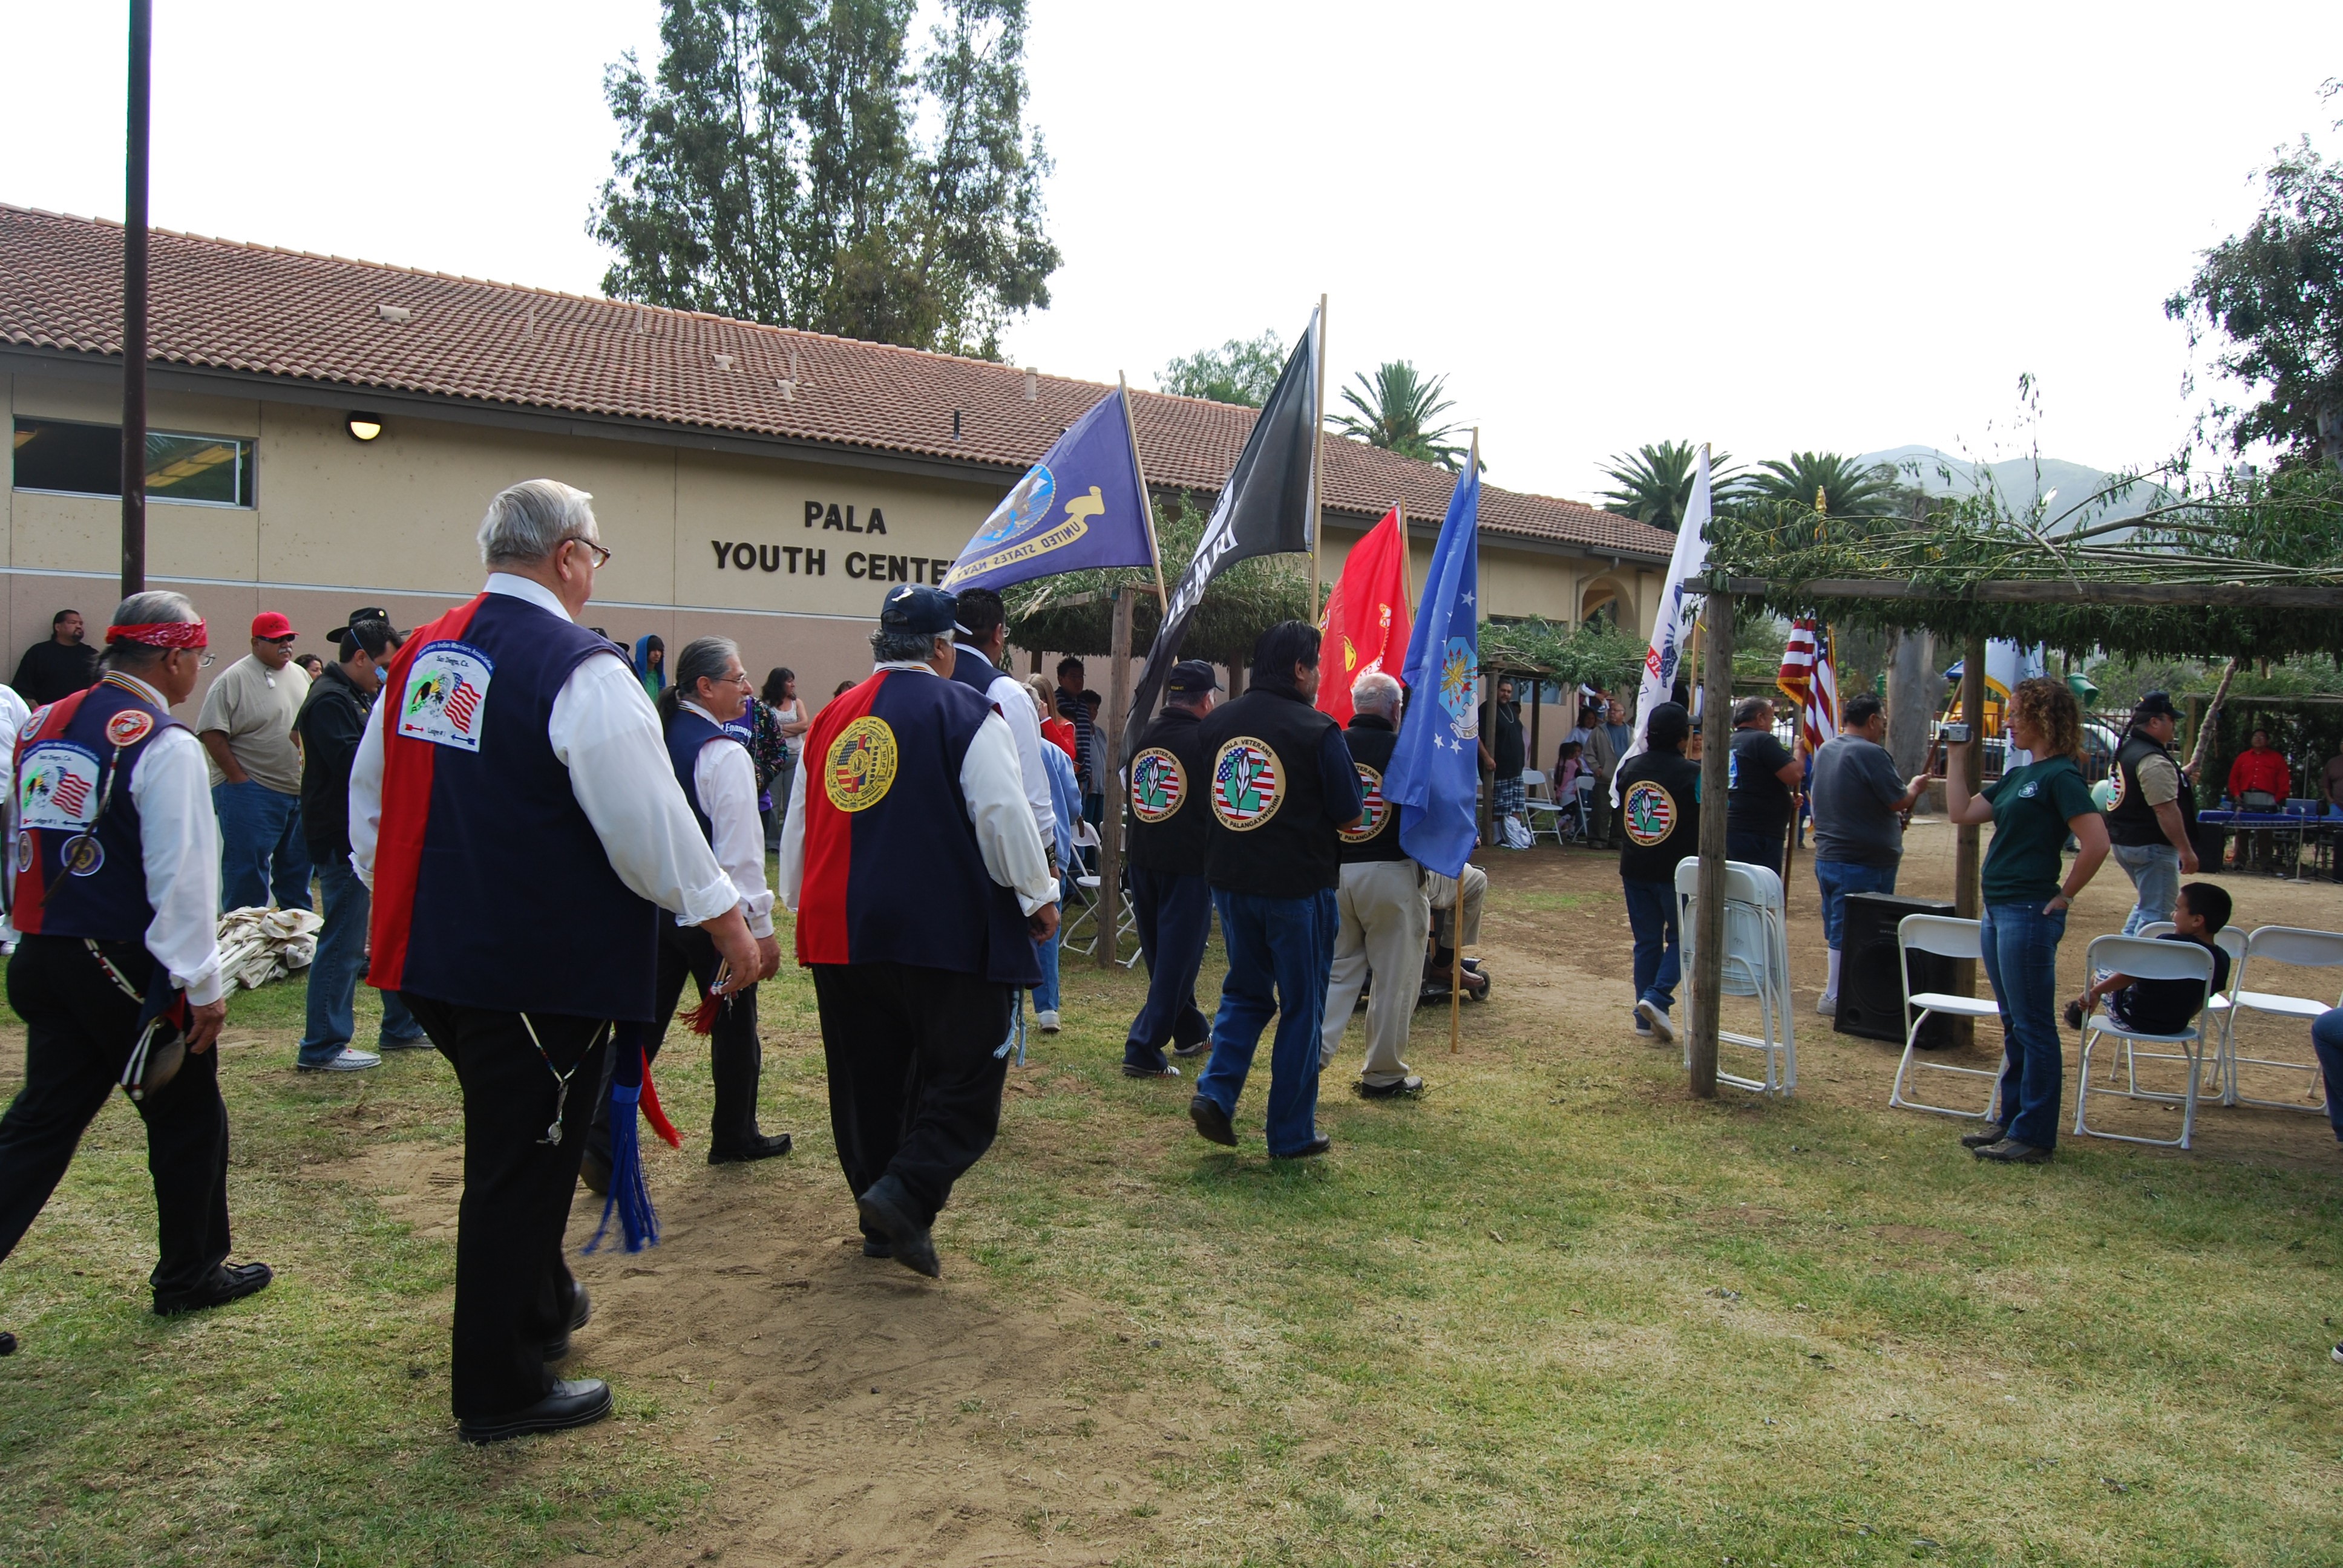 A procession of men in jackets and vests representing their tribal and veteran status escorting tribal flags past traditional ramadas (arbors) toward the Pala Youth Center